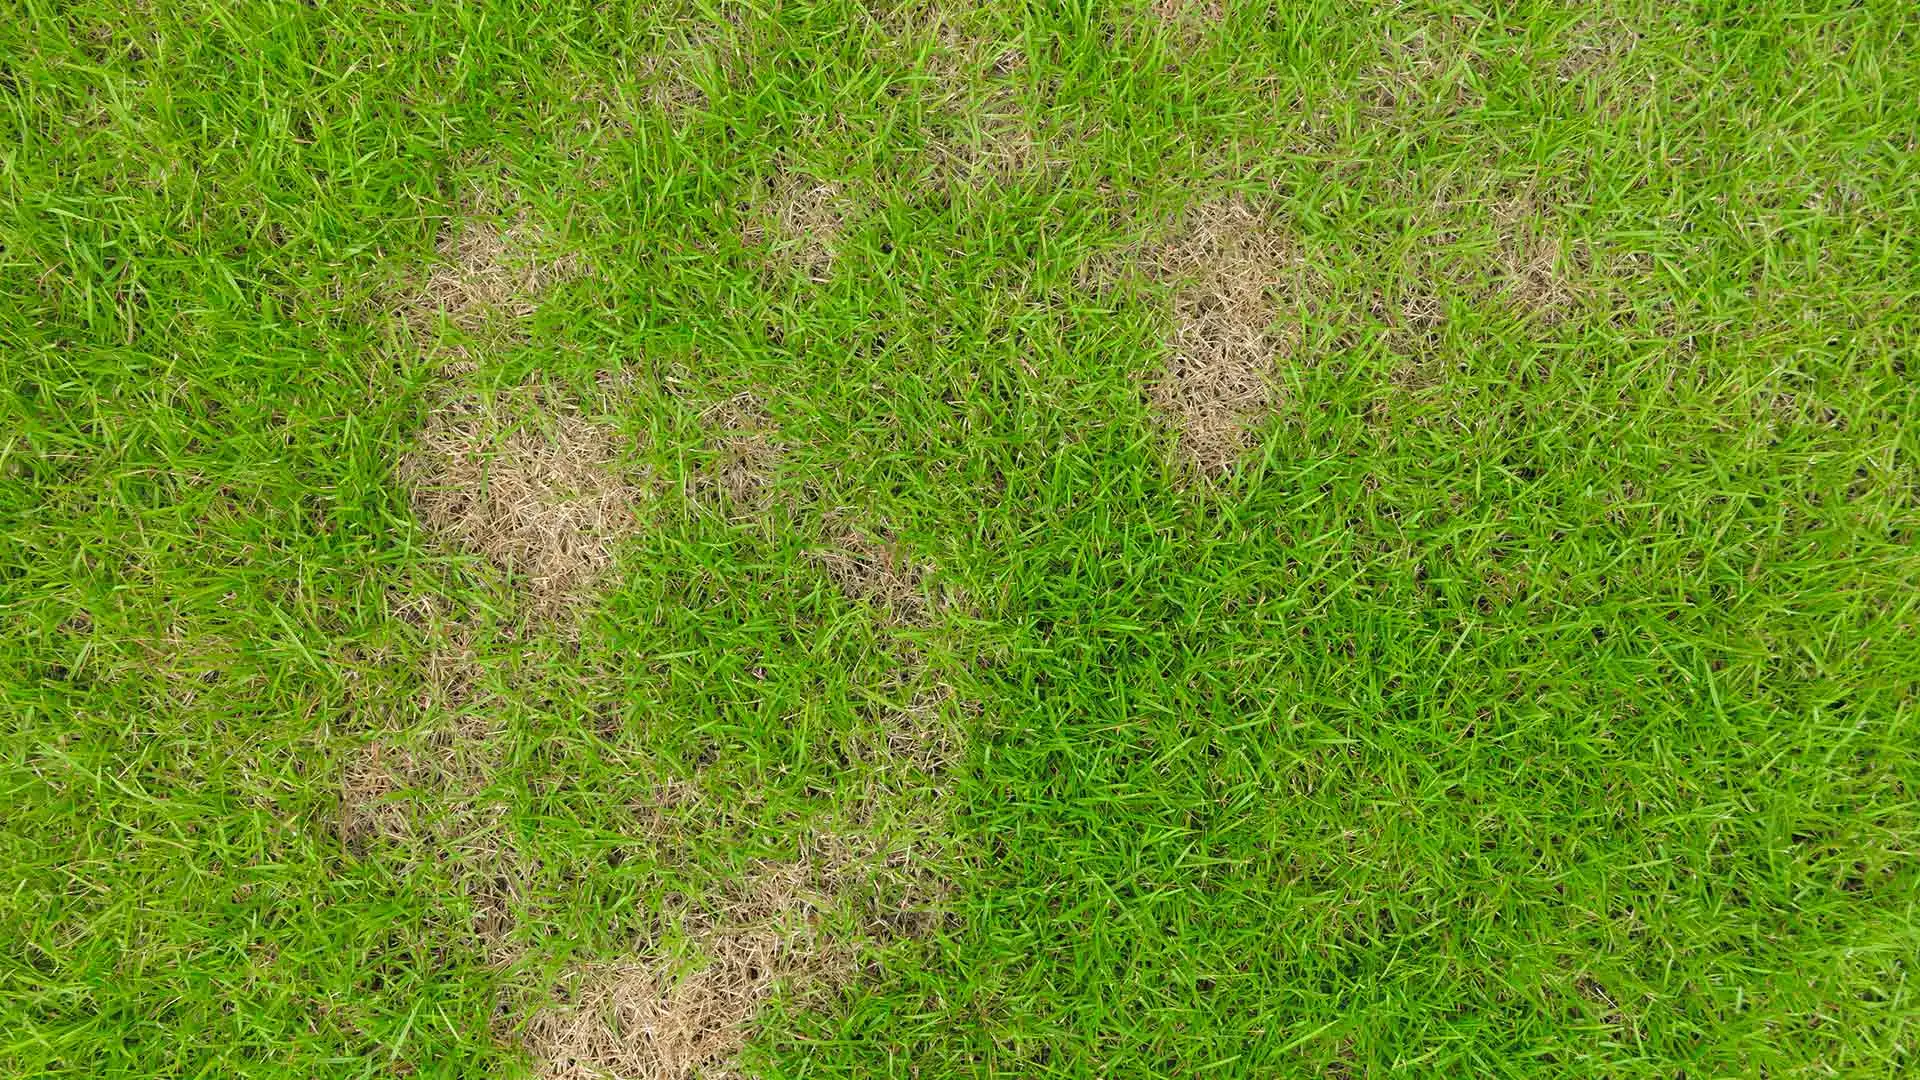 Necrotic Ring Spot - Be on the Lookout for This Lawn Disease This Fall